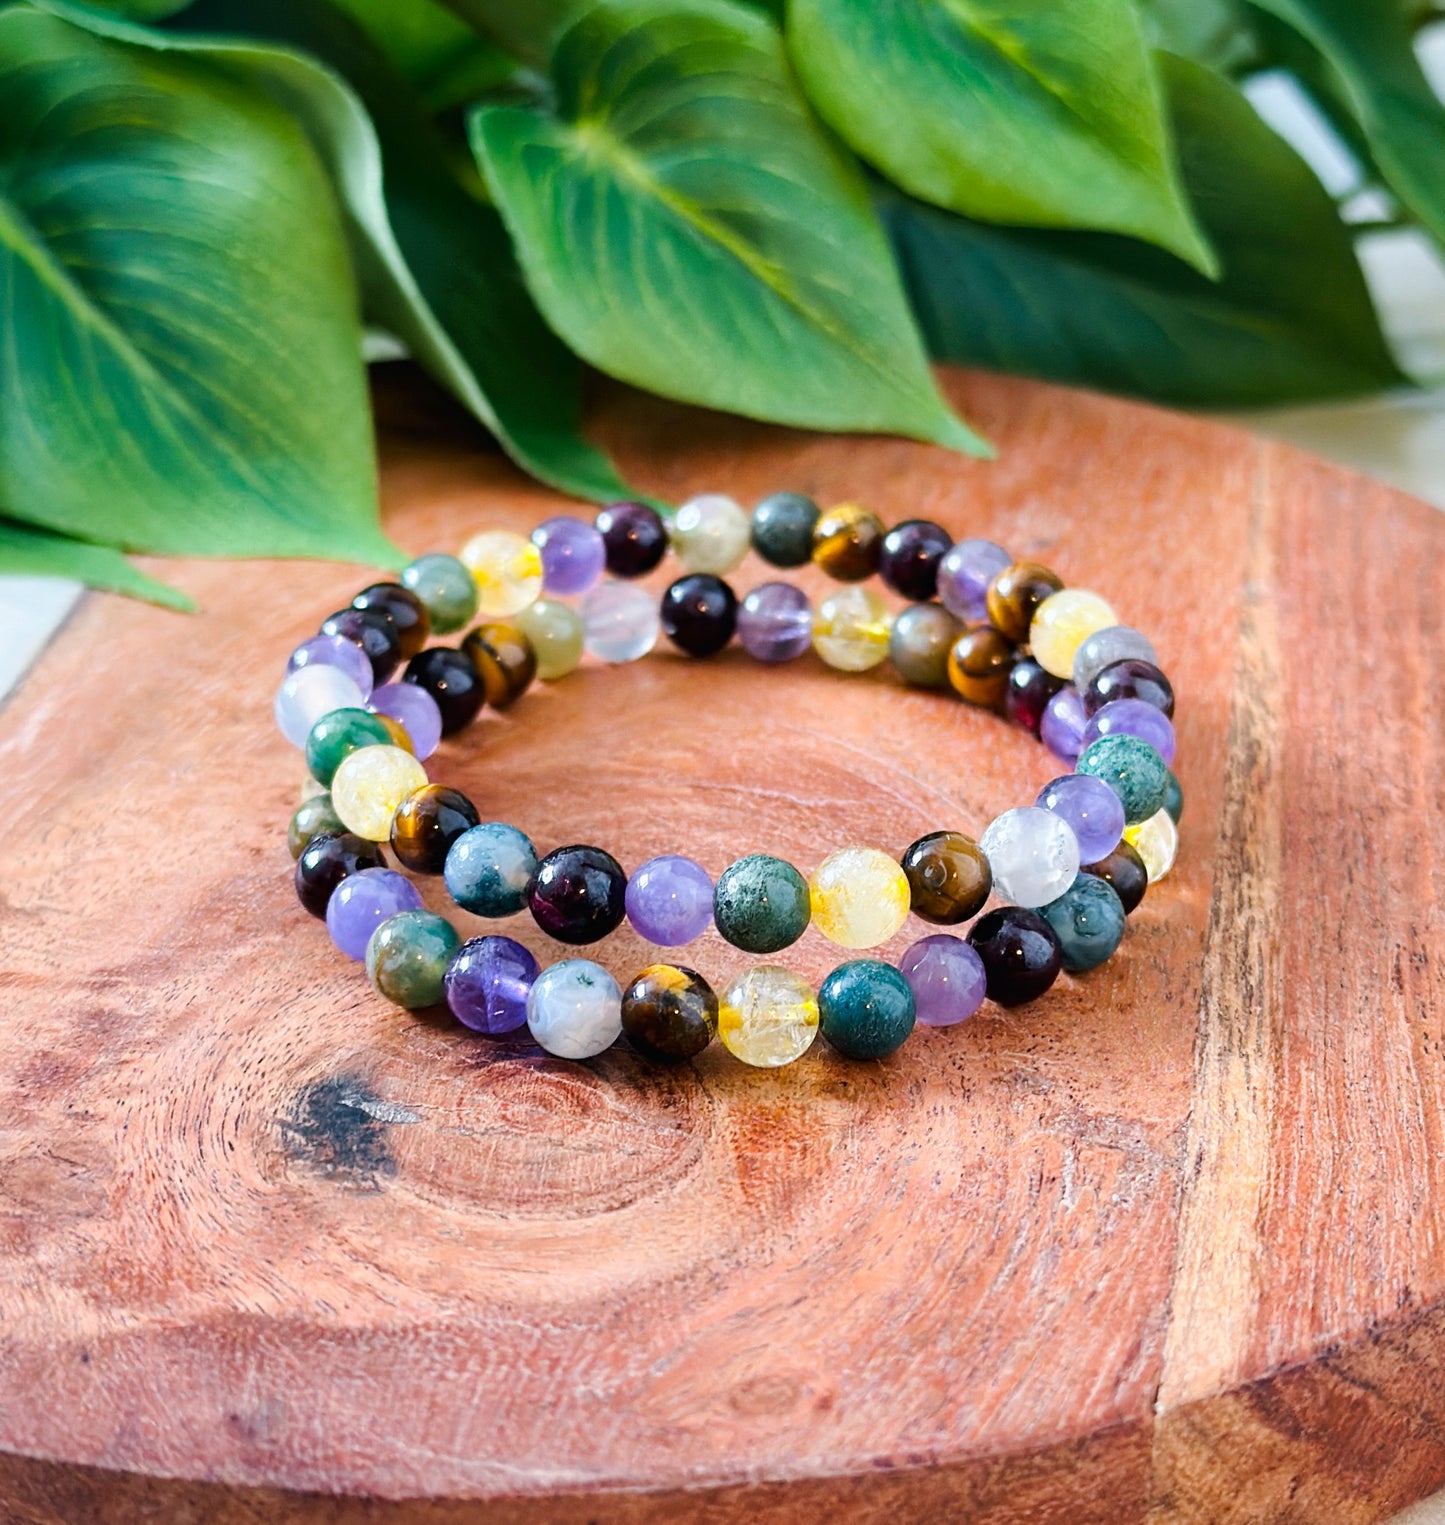 Introducing our exquisite gemstone bracelet, a harmonious blend of Moss Agate, Amethyst, Citrine, Tigers Eye, and Garnet. Crafted with precision and care, each stone contributes unique healing properties to create a holistic synergy.